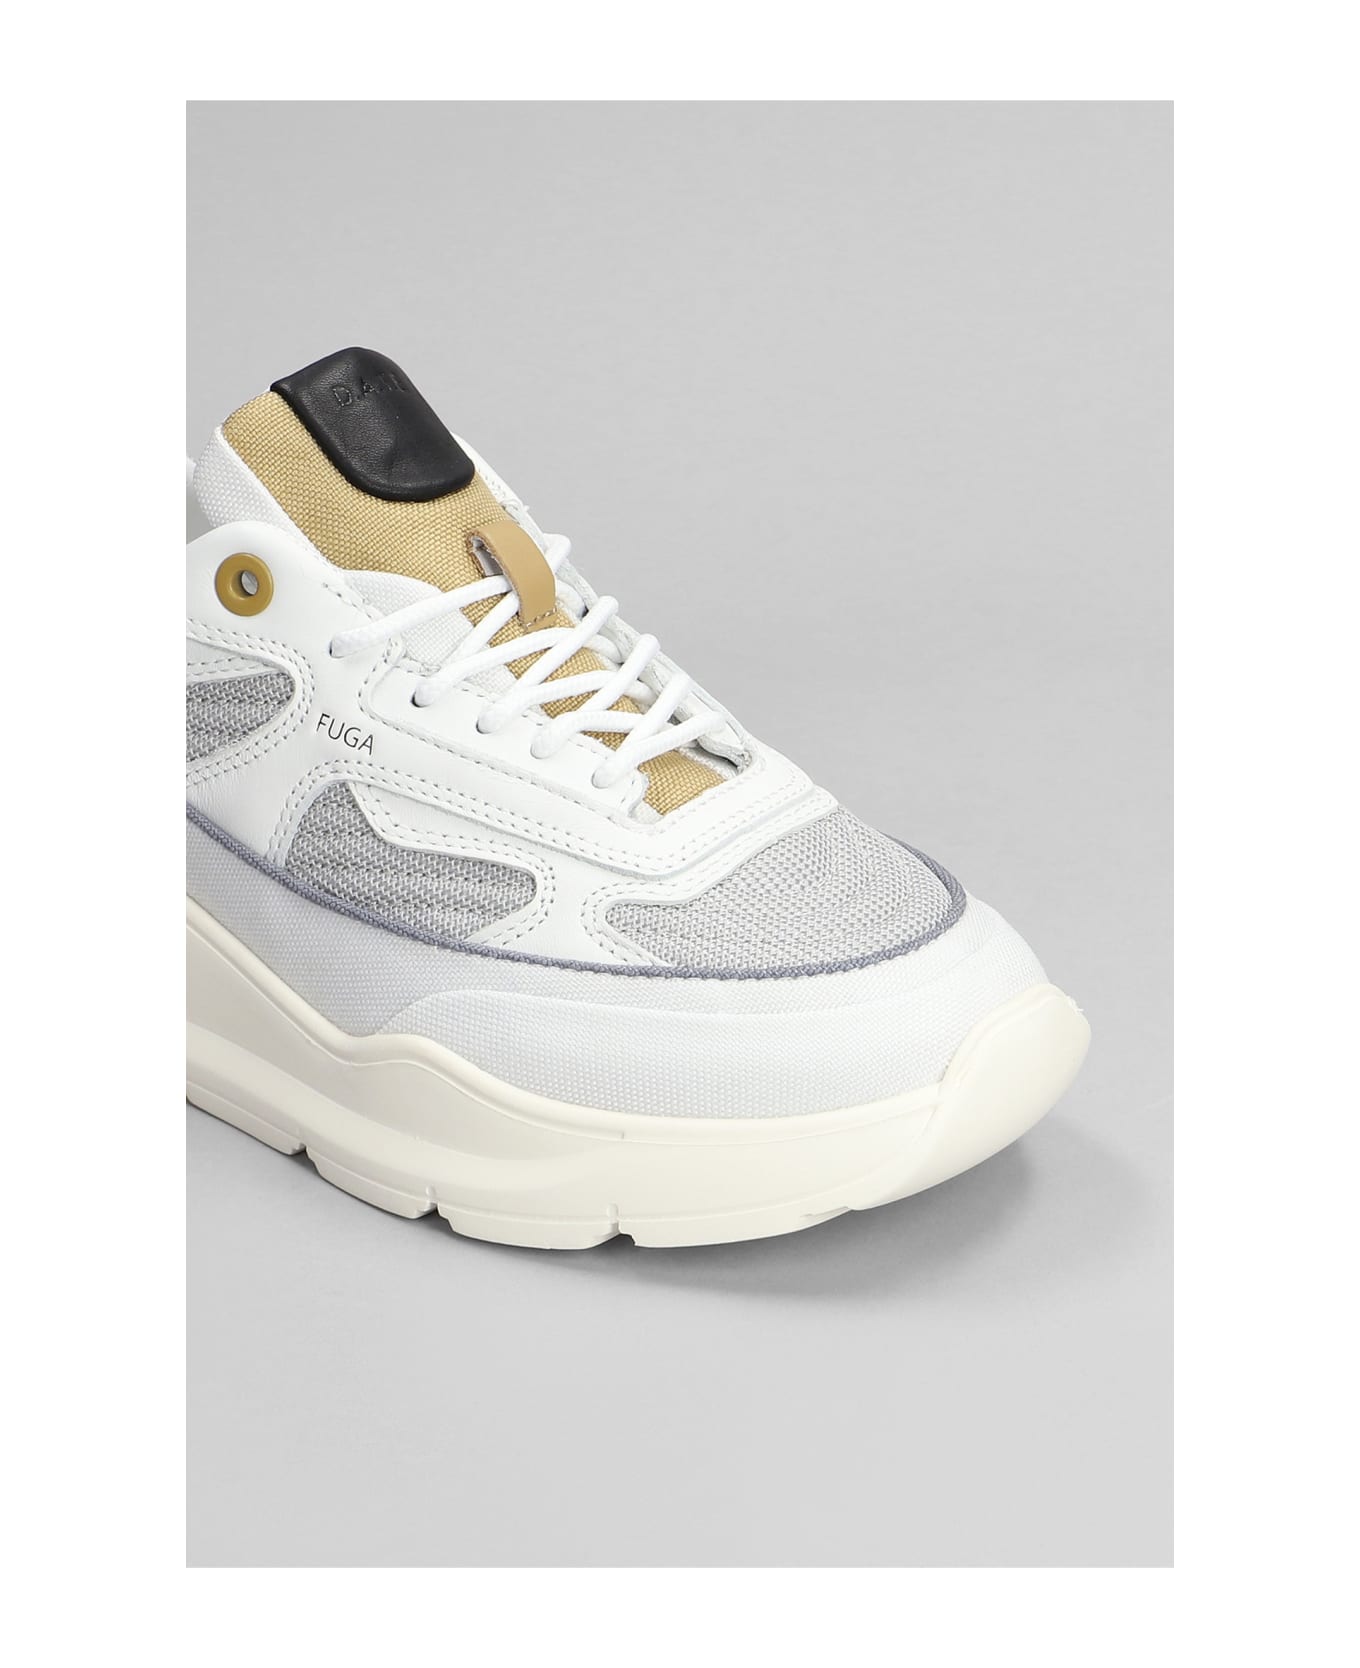 D.A.T.E. Fuga Sneakers In White Leather And Fabric - white